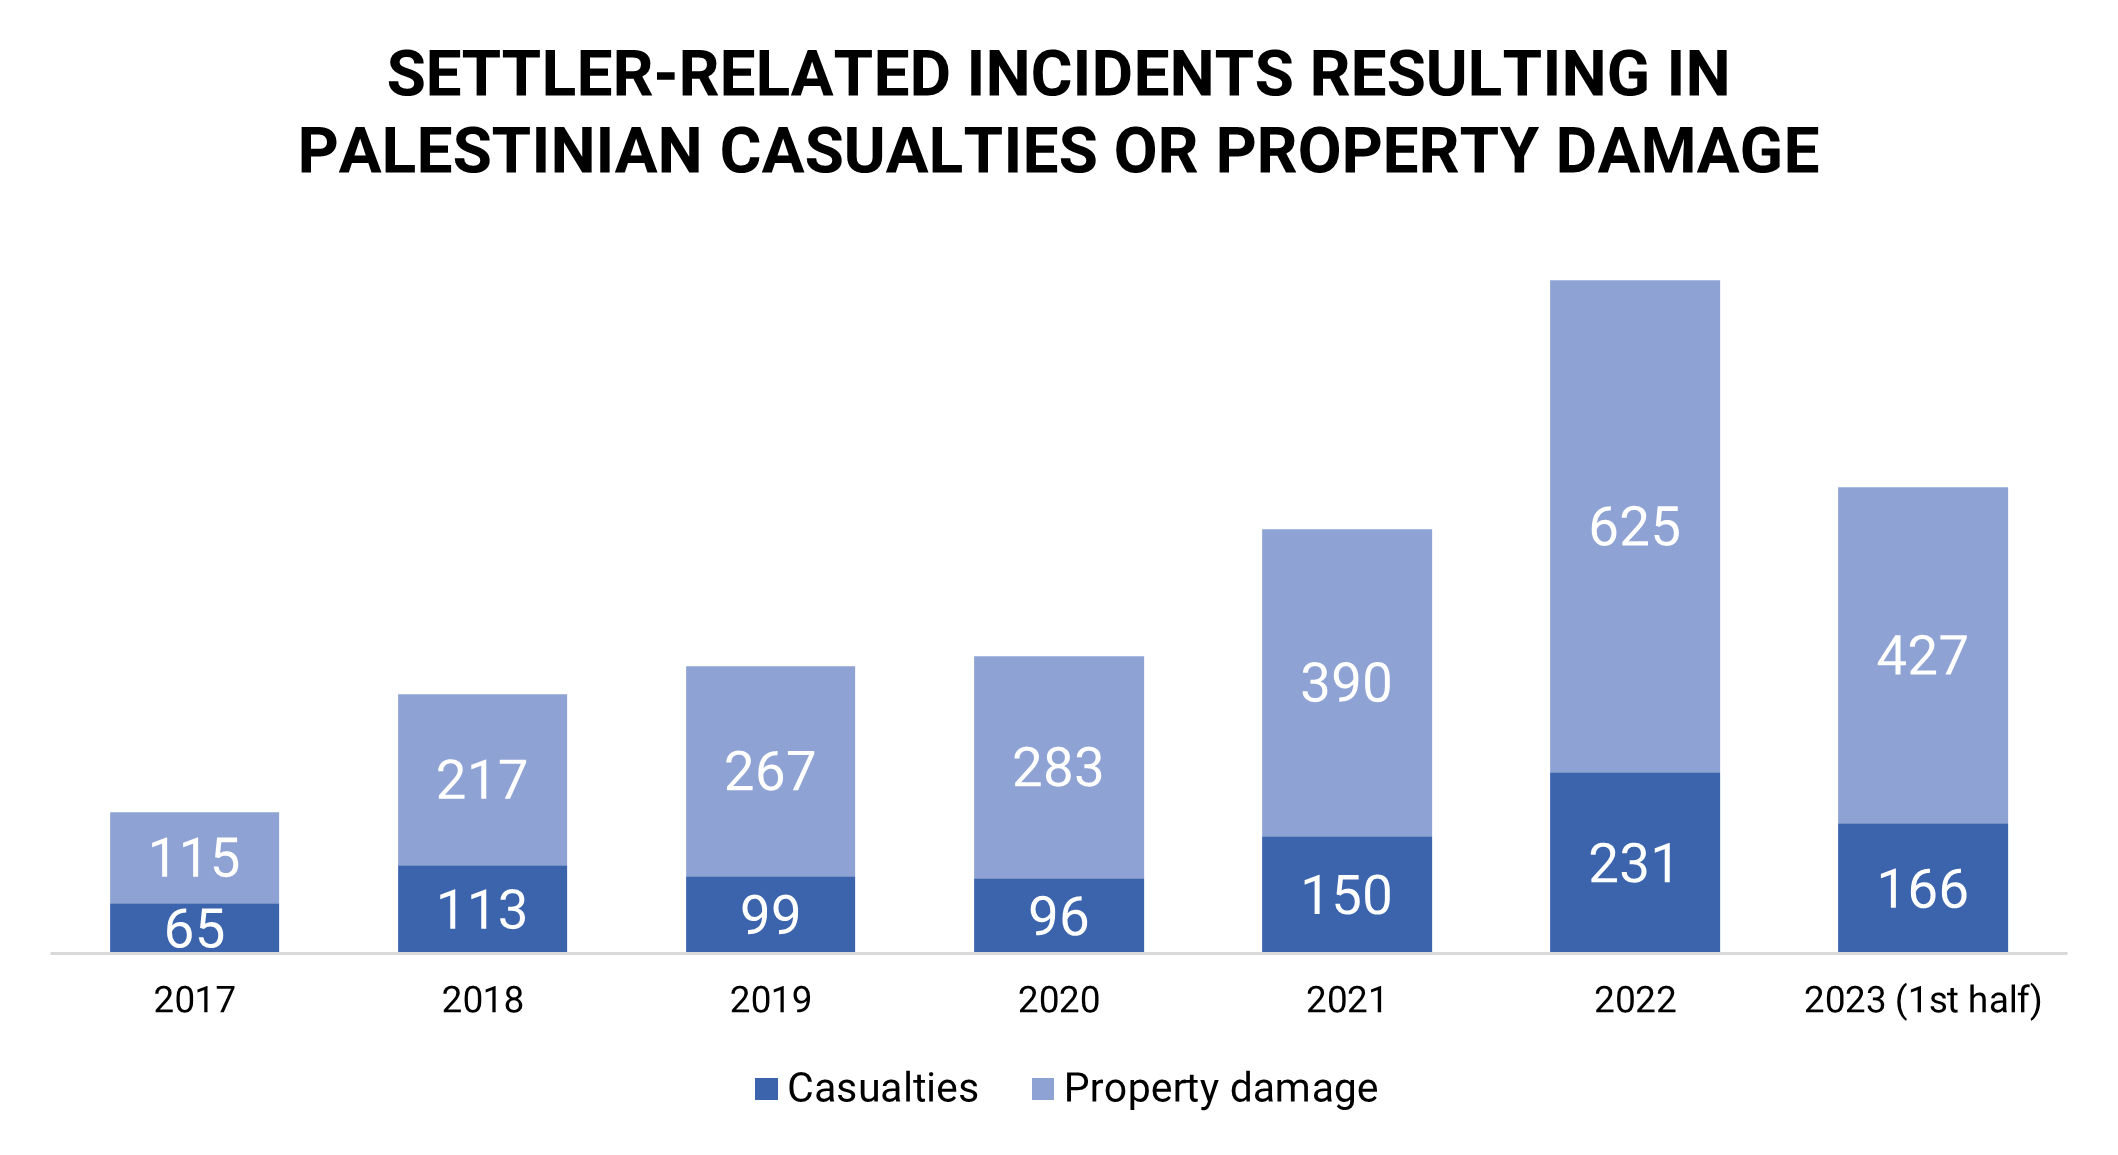 Bar chart showing an increases in settler-related incidents over the years